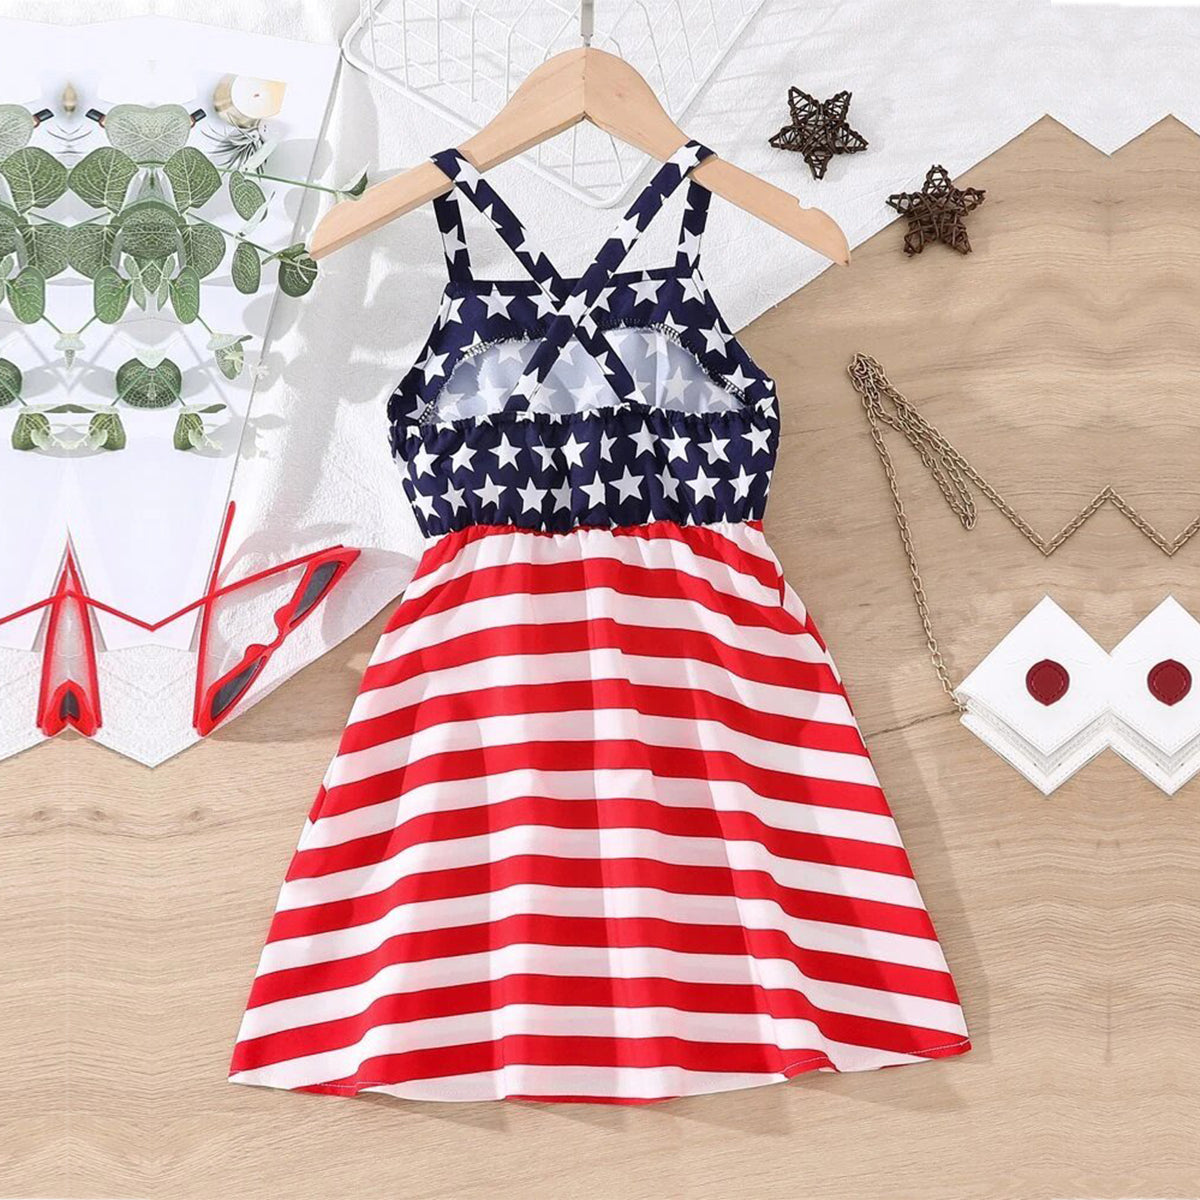 BabyGirl's Yellow Flotal & Red Blue Multi Lining Dresses_Frocks Combo for Baby Girls.